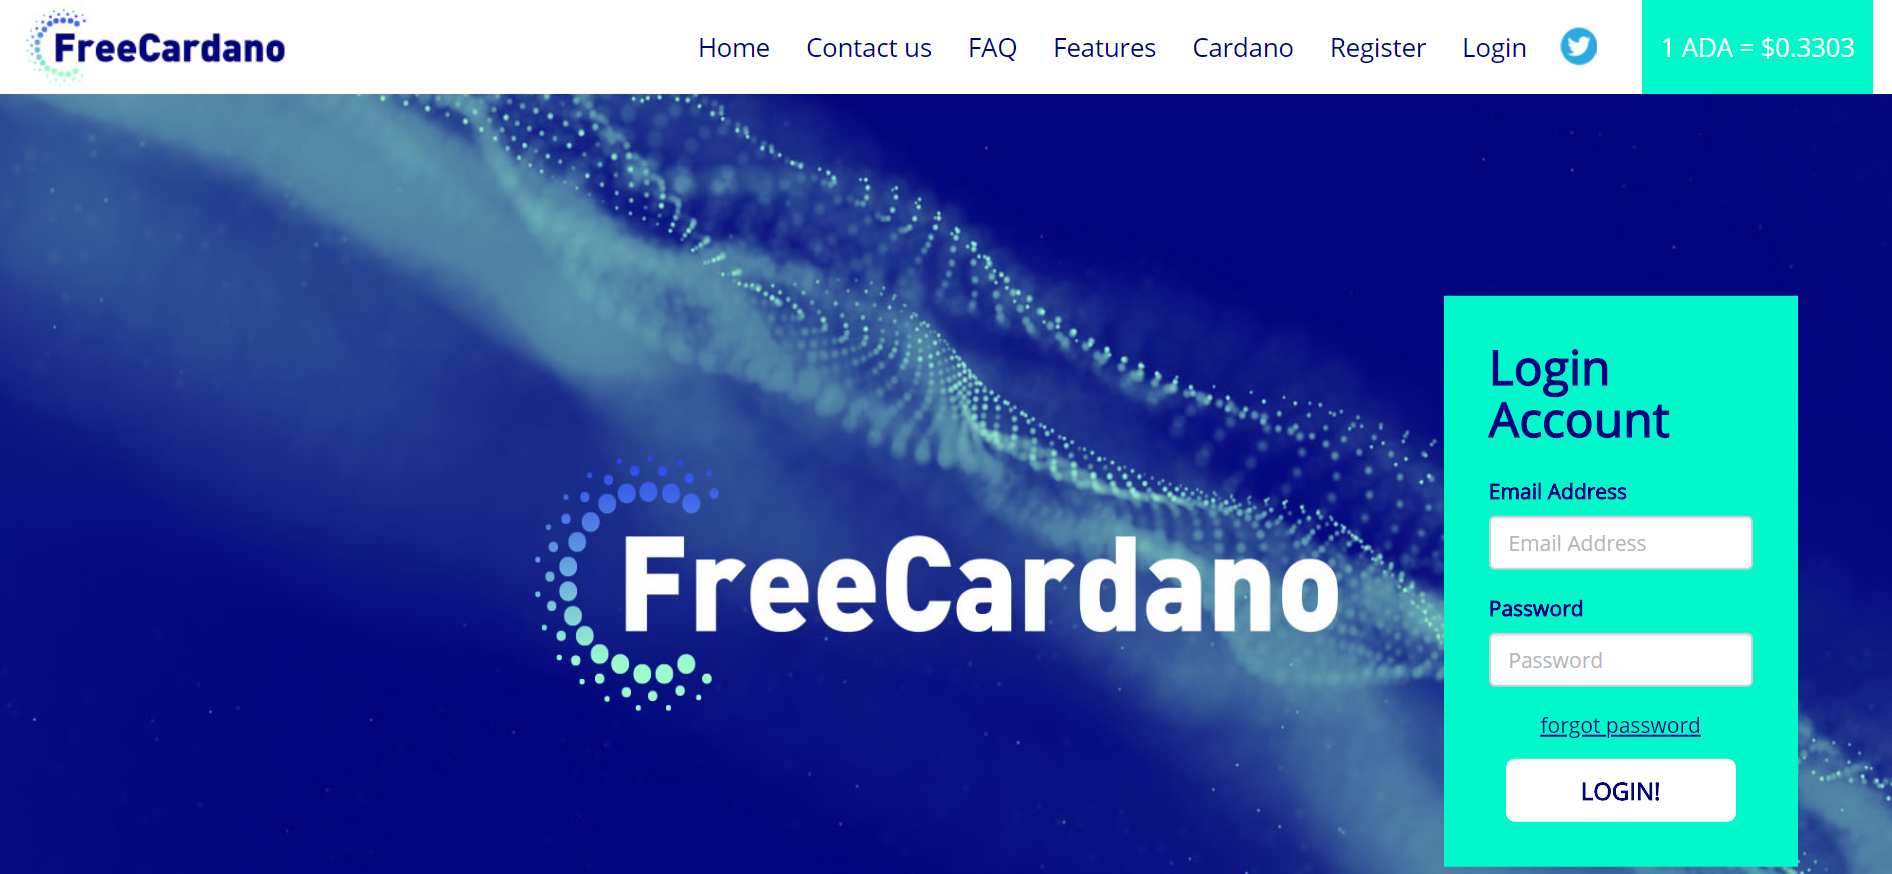 How to make money online e how to get free referrals with Free Cardano